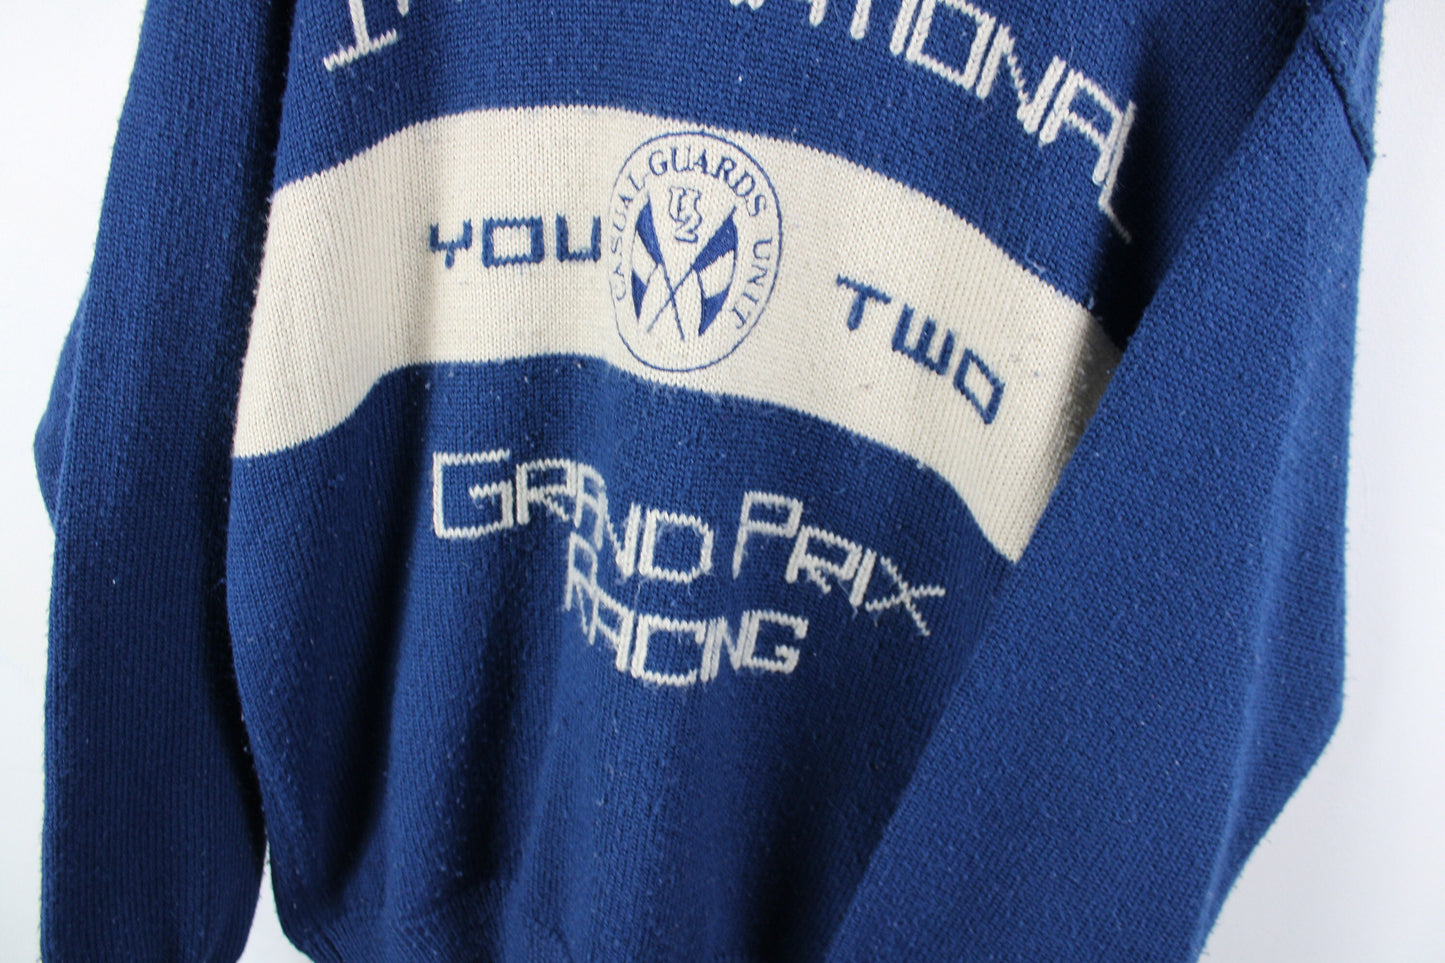 F1 Racing Sweater / Vintage Grand-Prix Formula One Le Mans Sweat-Shirt / 1999 / 2000s / Y2k Motor Sports Graphic